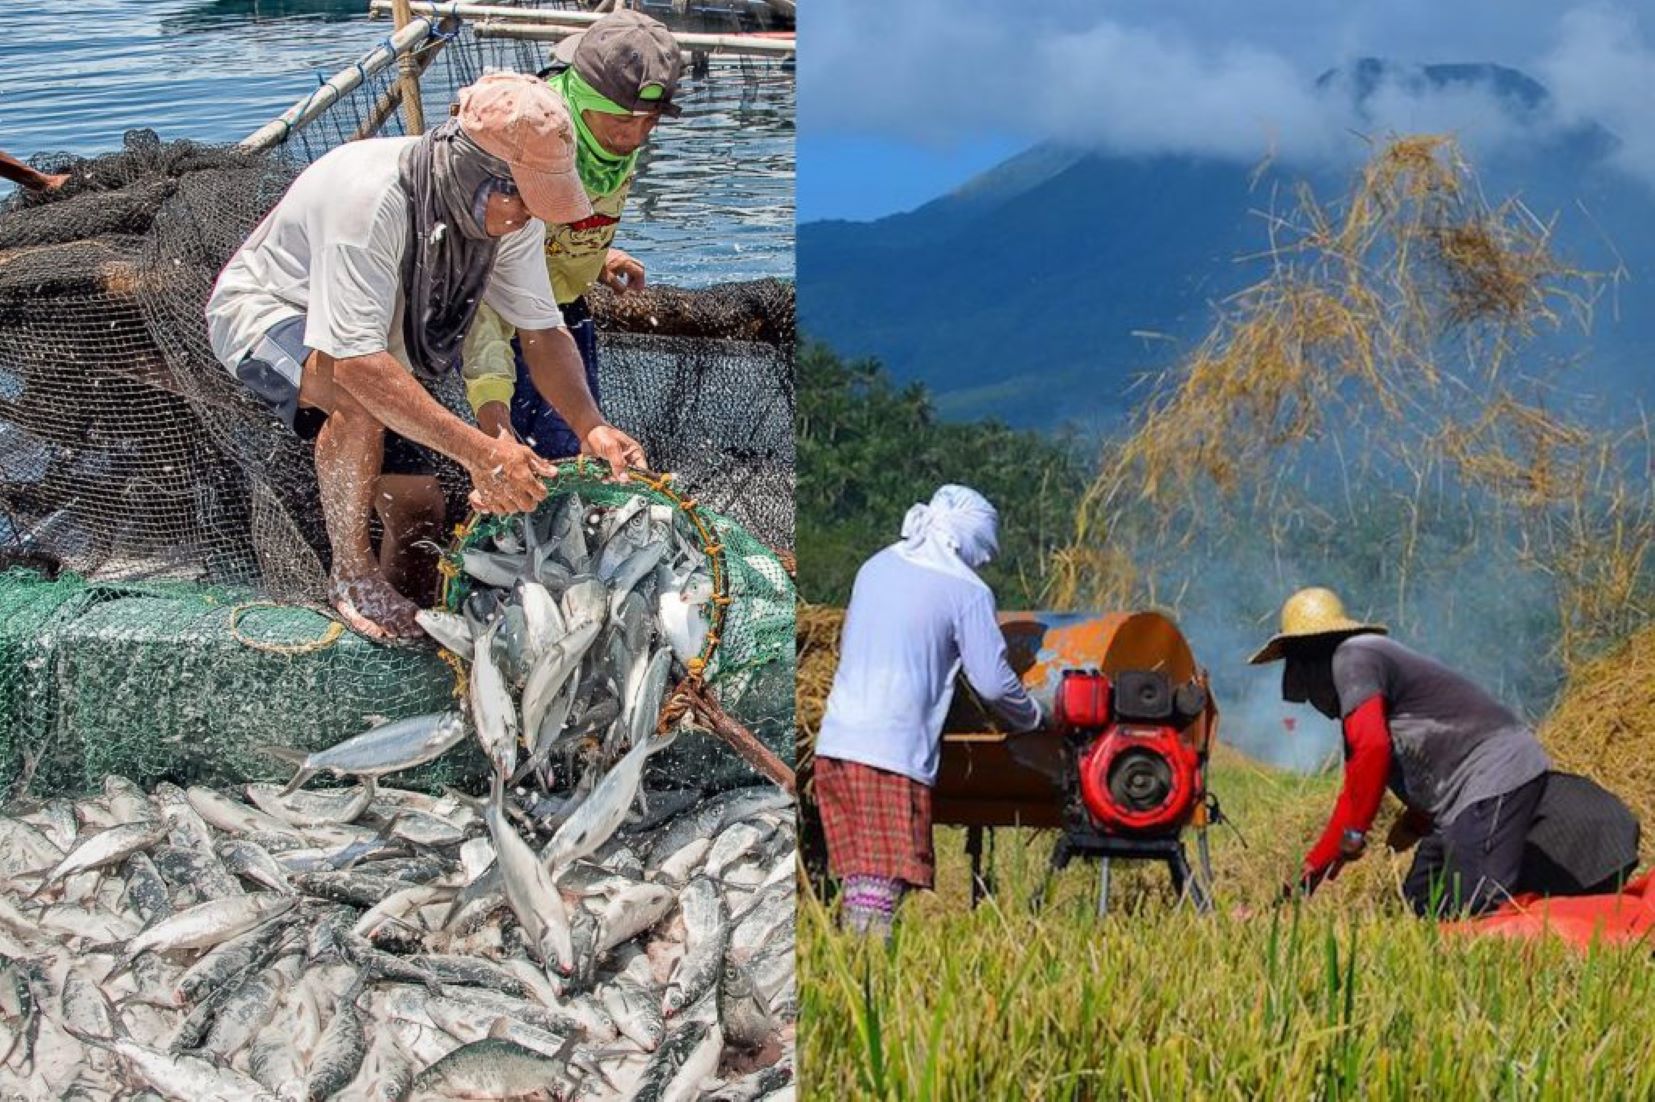 World Bank Approved Agri Project To Help Farmers, Fisherfolk In Philippines